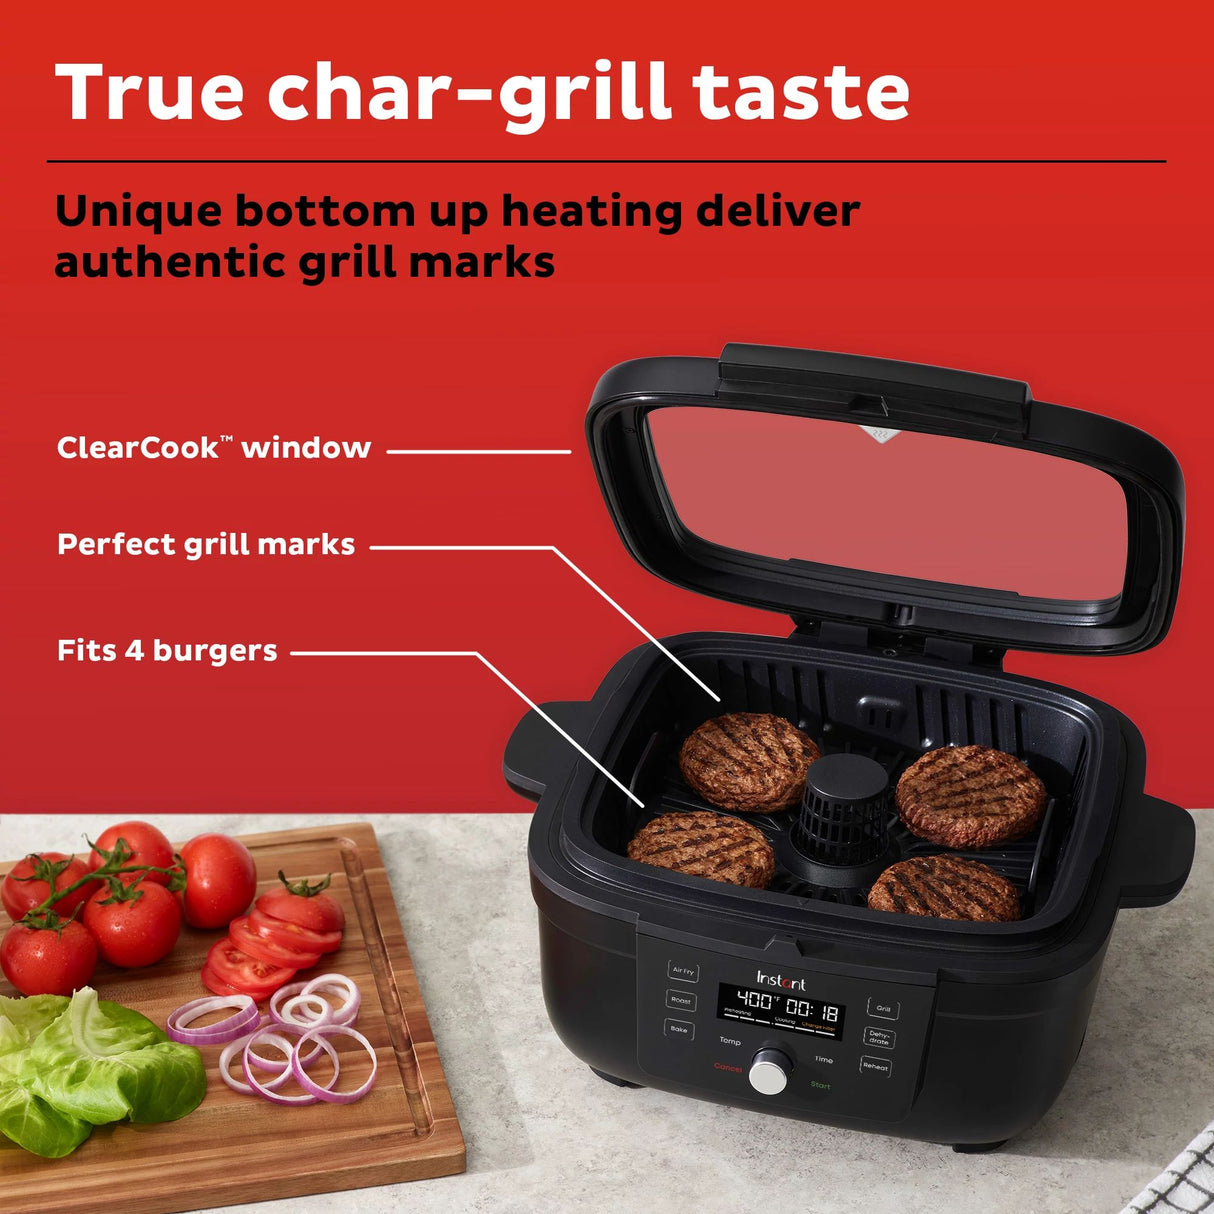  Instant® Indoor Grill and Air Fryer with text True char-grill taste